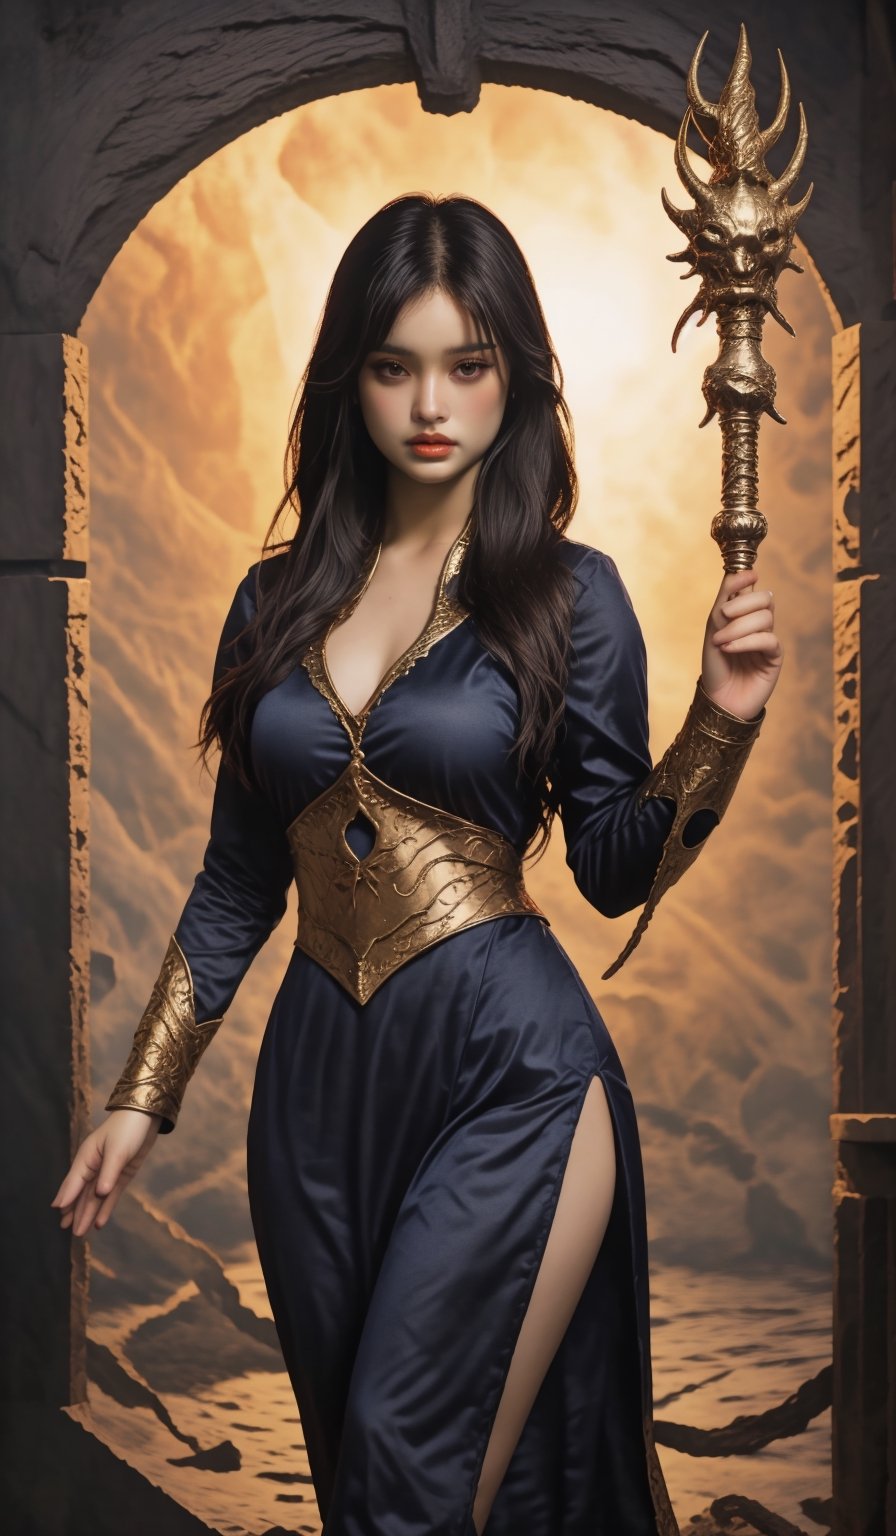 1girl-in-her-20s, shameless-bishoujo, mix-of-natural-hair-styles, parted-lips, dangerous-physique, no-virgin-anymore, realistic-detailed-skin, (((Ultra-HD-photo-same-realistic-quality-details))), remarkable-colors, short-dress, wizard-outfit, holding-staff, casting-spells, (((relaxed))), fantasy-battlefield, optimal-lighting, Daughter of Dragon God, fabetwns, nodf_lora,<lora:659111690174031528:1.0>